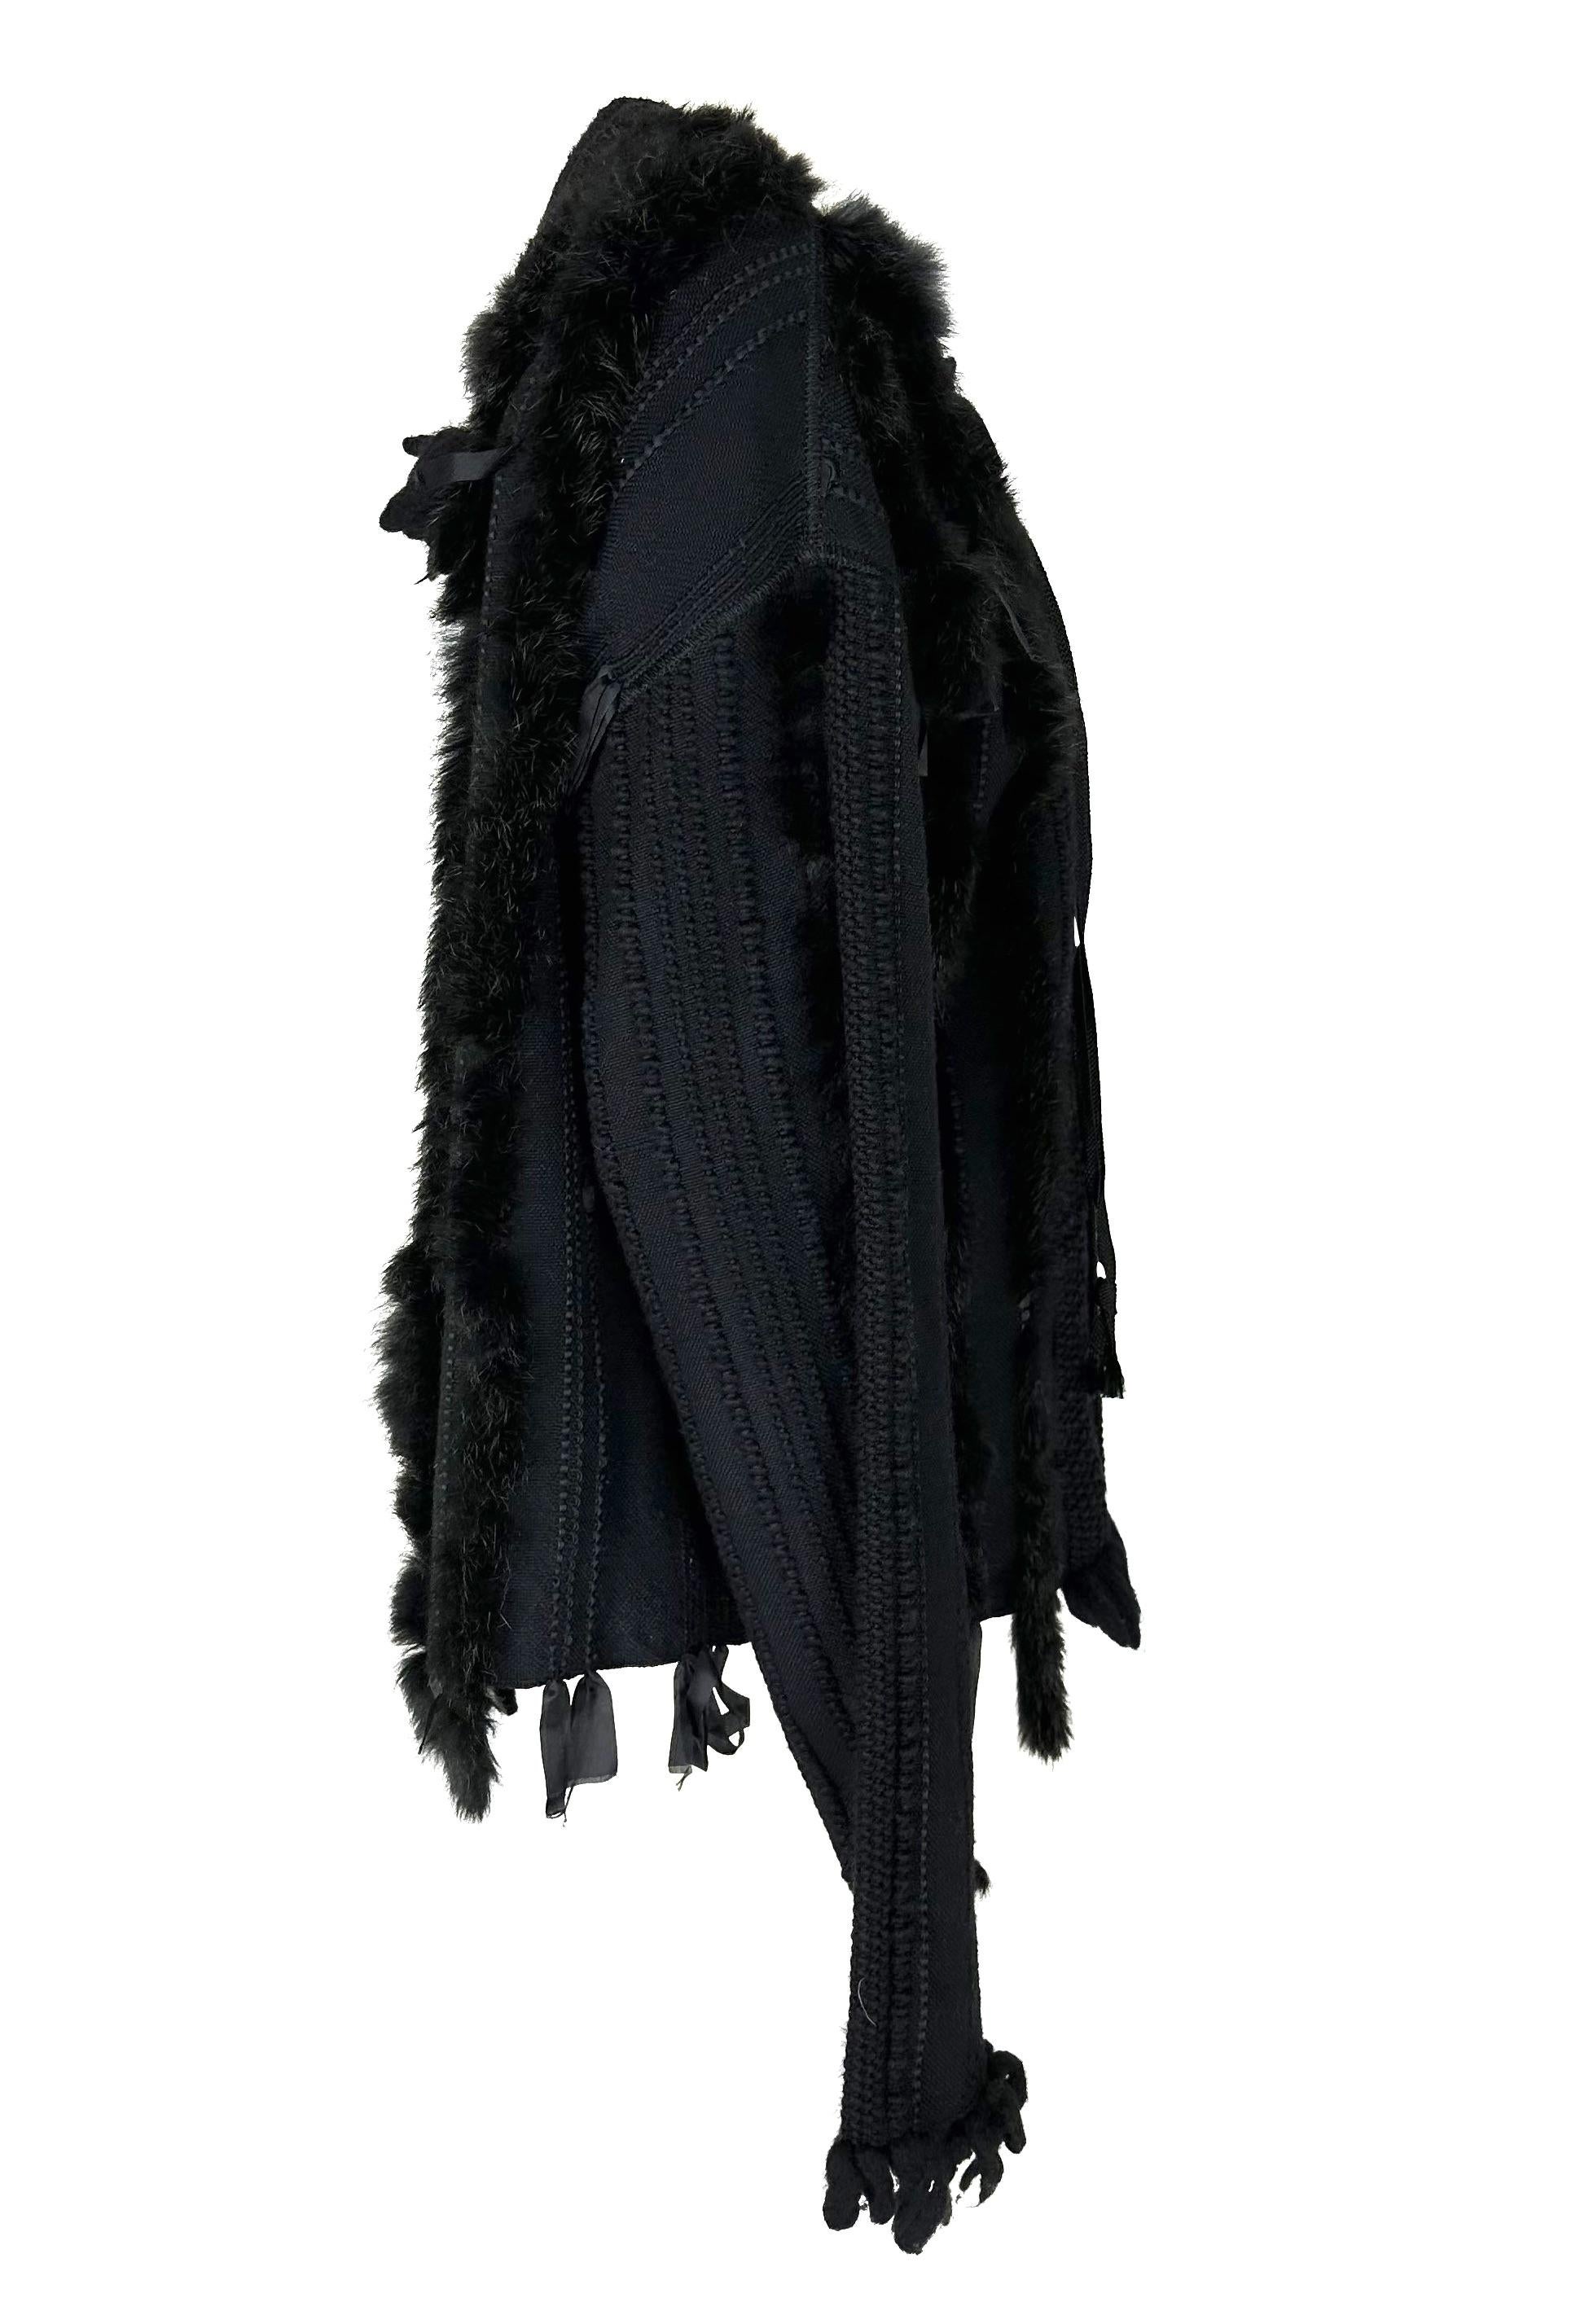 F/W 2002 Gucci by Tom Ford Black Fur Trimmed Knit Lace-Up Oversized Sweater Top en vente 4